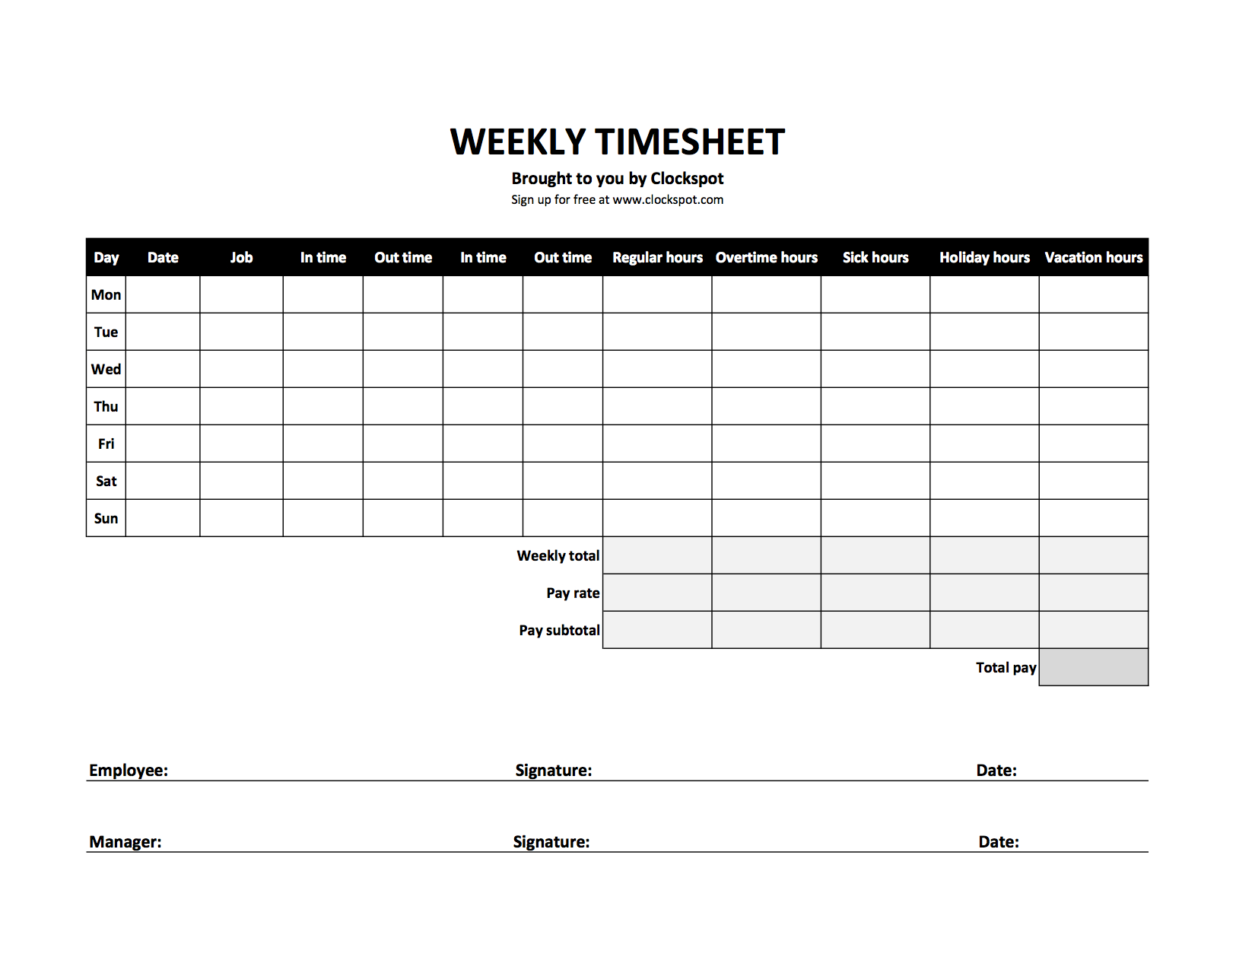 Monthly Timesheet Excel Spreadsheet — Db